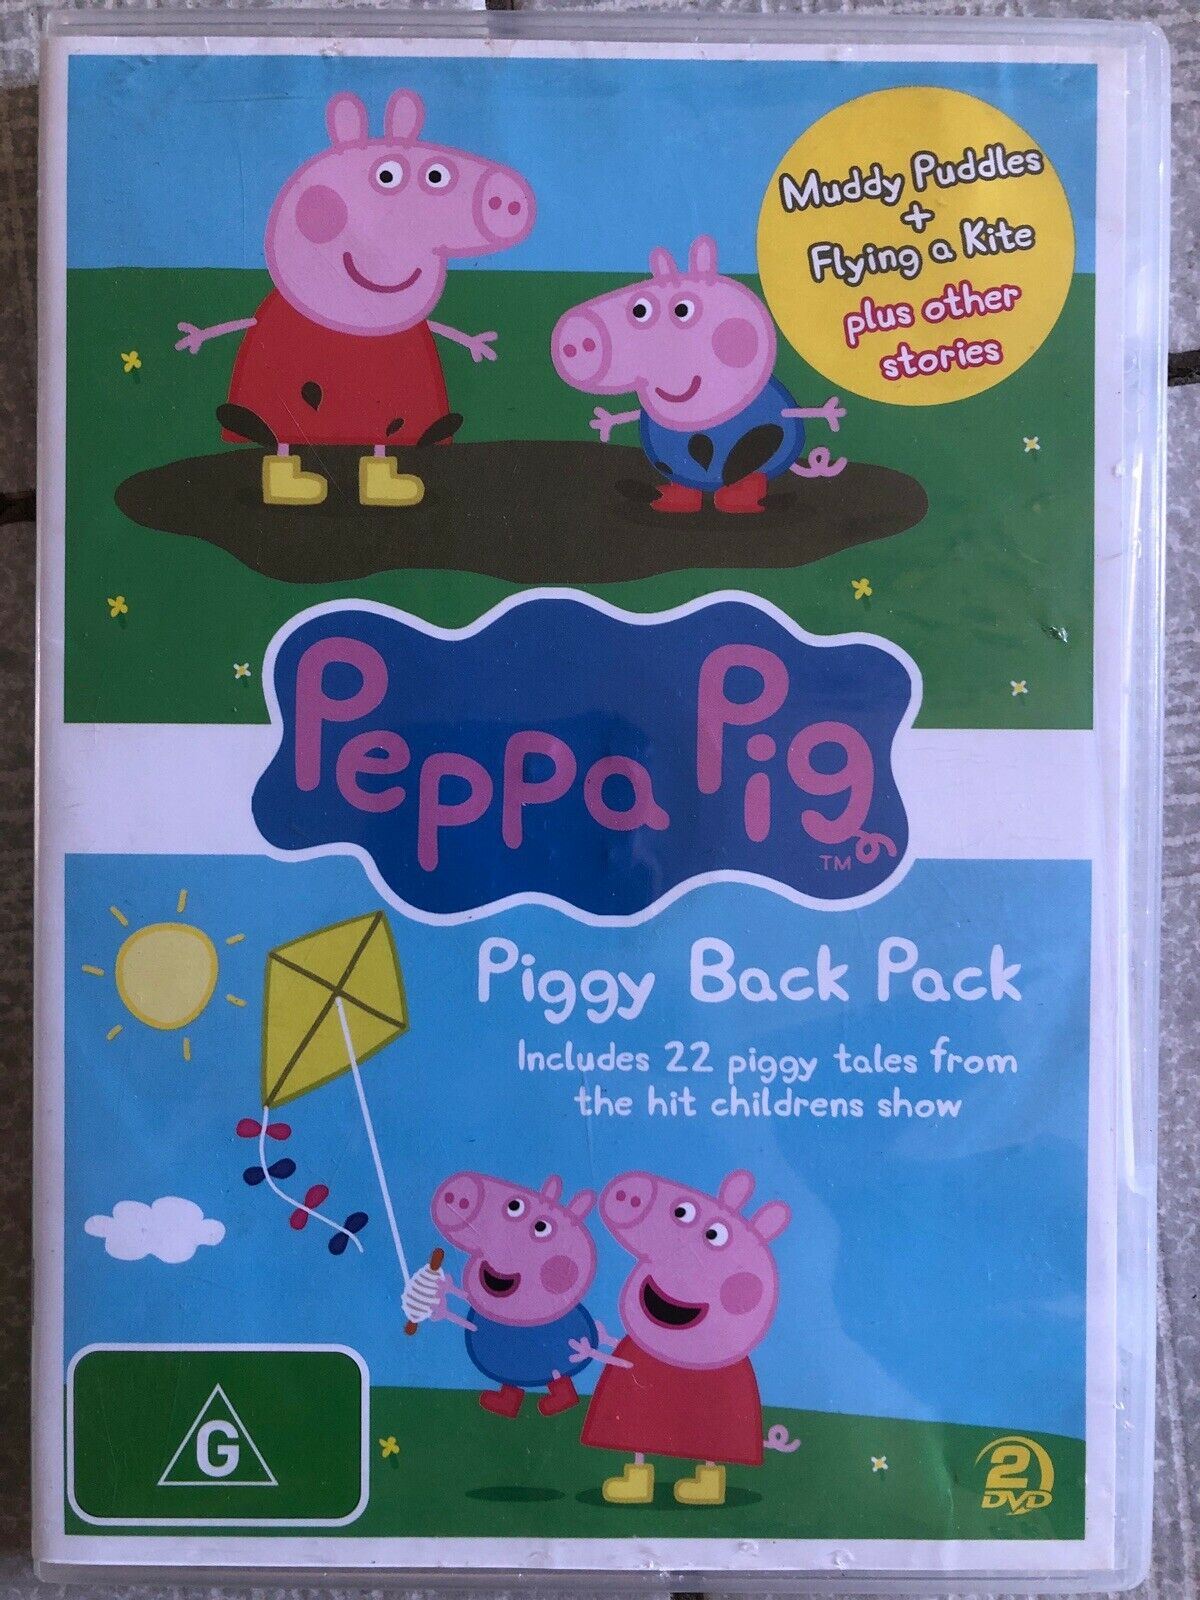 Peppa Pig - Piggy Back Pack : Collection (DVD, 6-Disc) Muddy Puddles, Flying a..